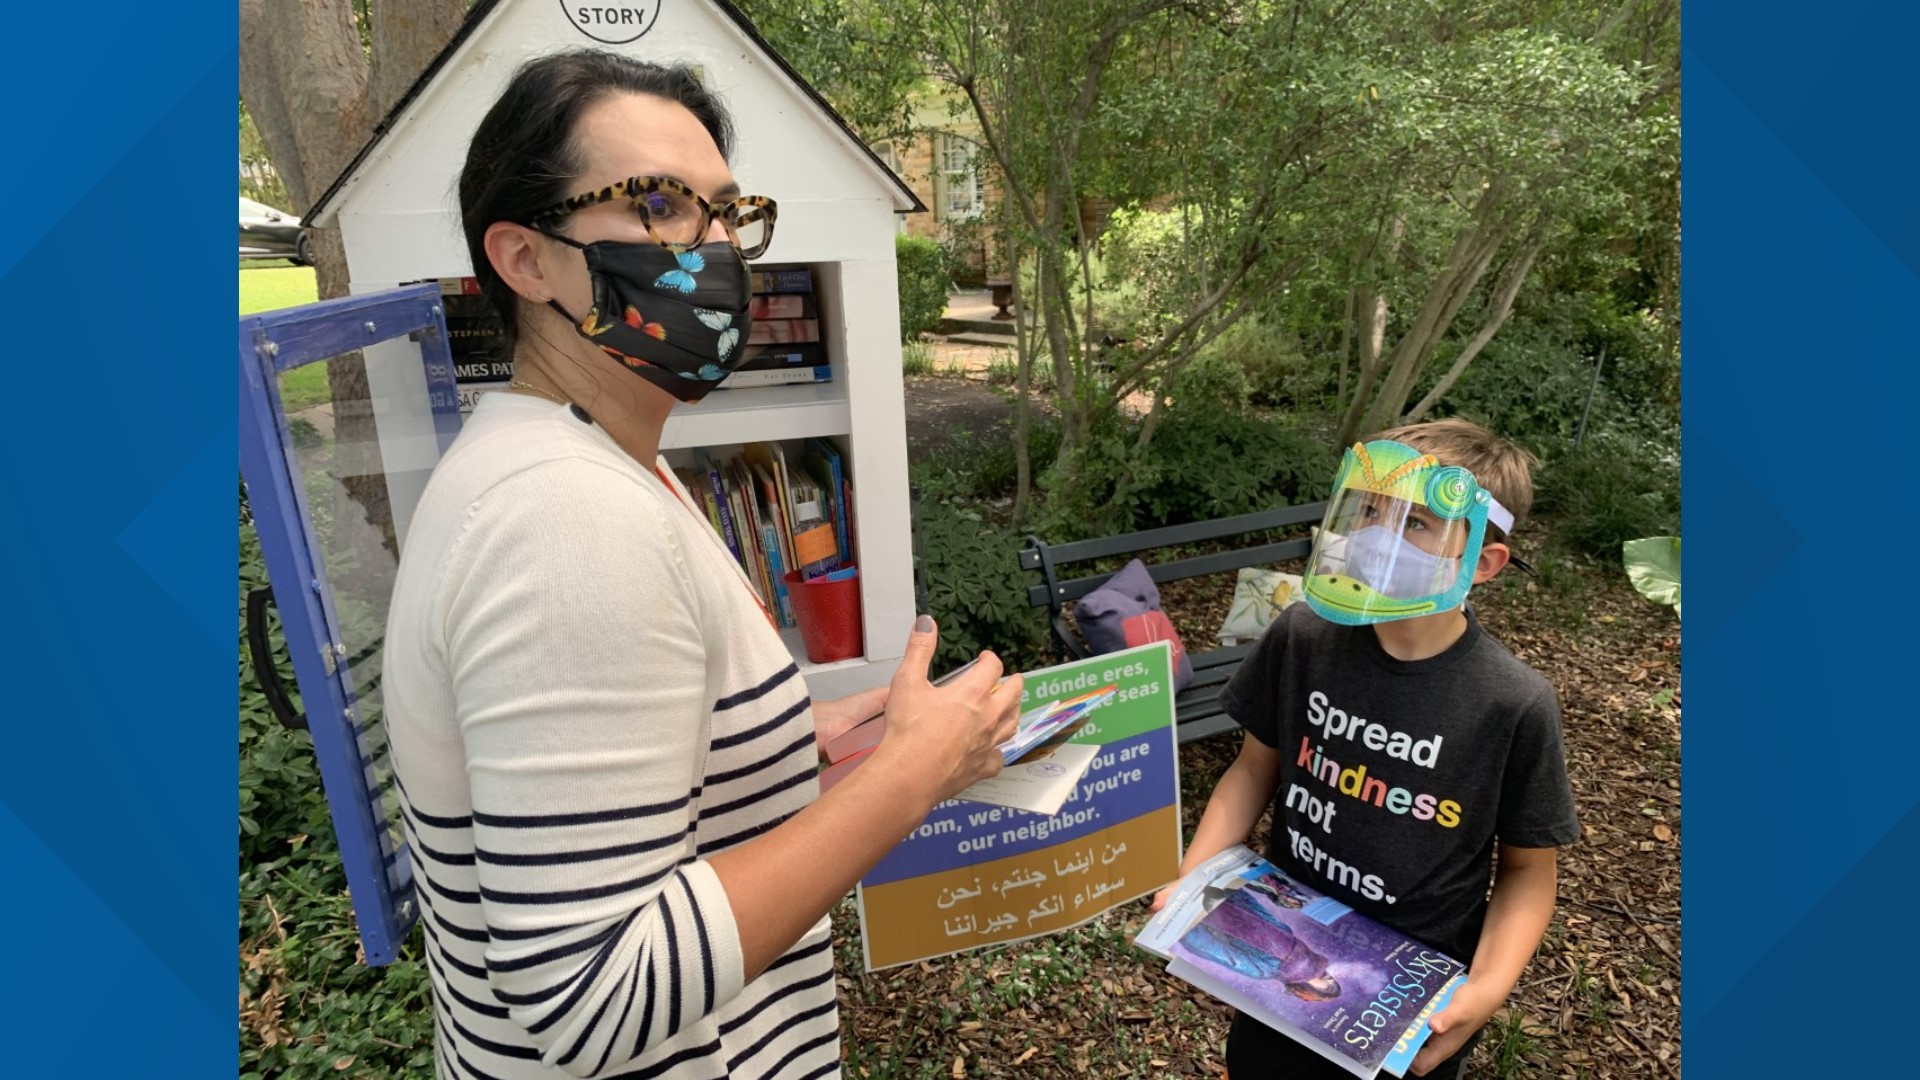 Rachel and Elliott Koppa launched an effort this summer with the goal of putting 10 diverse books in every Little Free Library across the city.